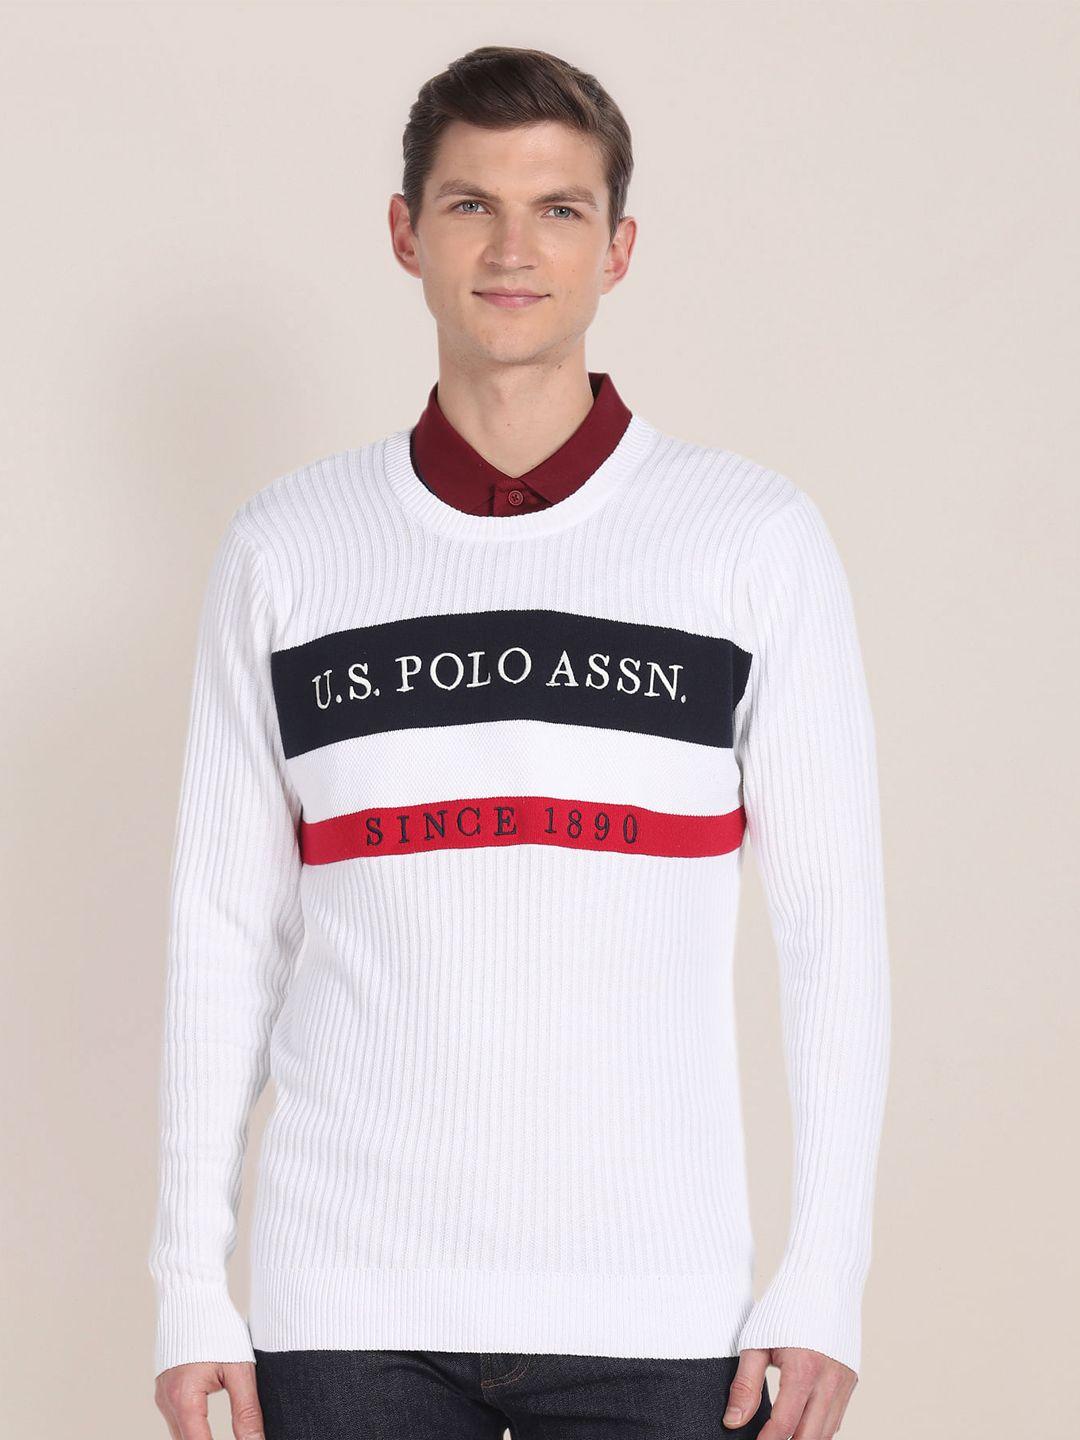 u.s.-polo-assn.-printed-pullover-sweater